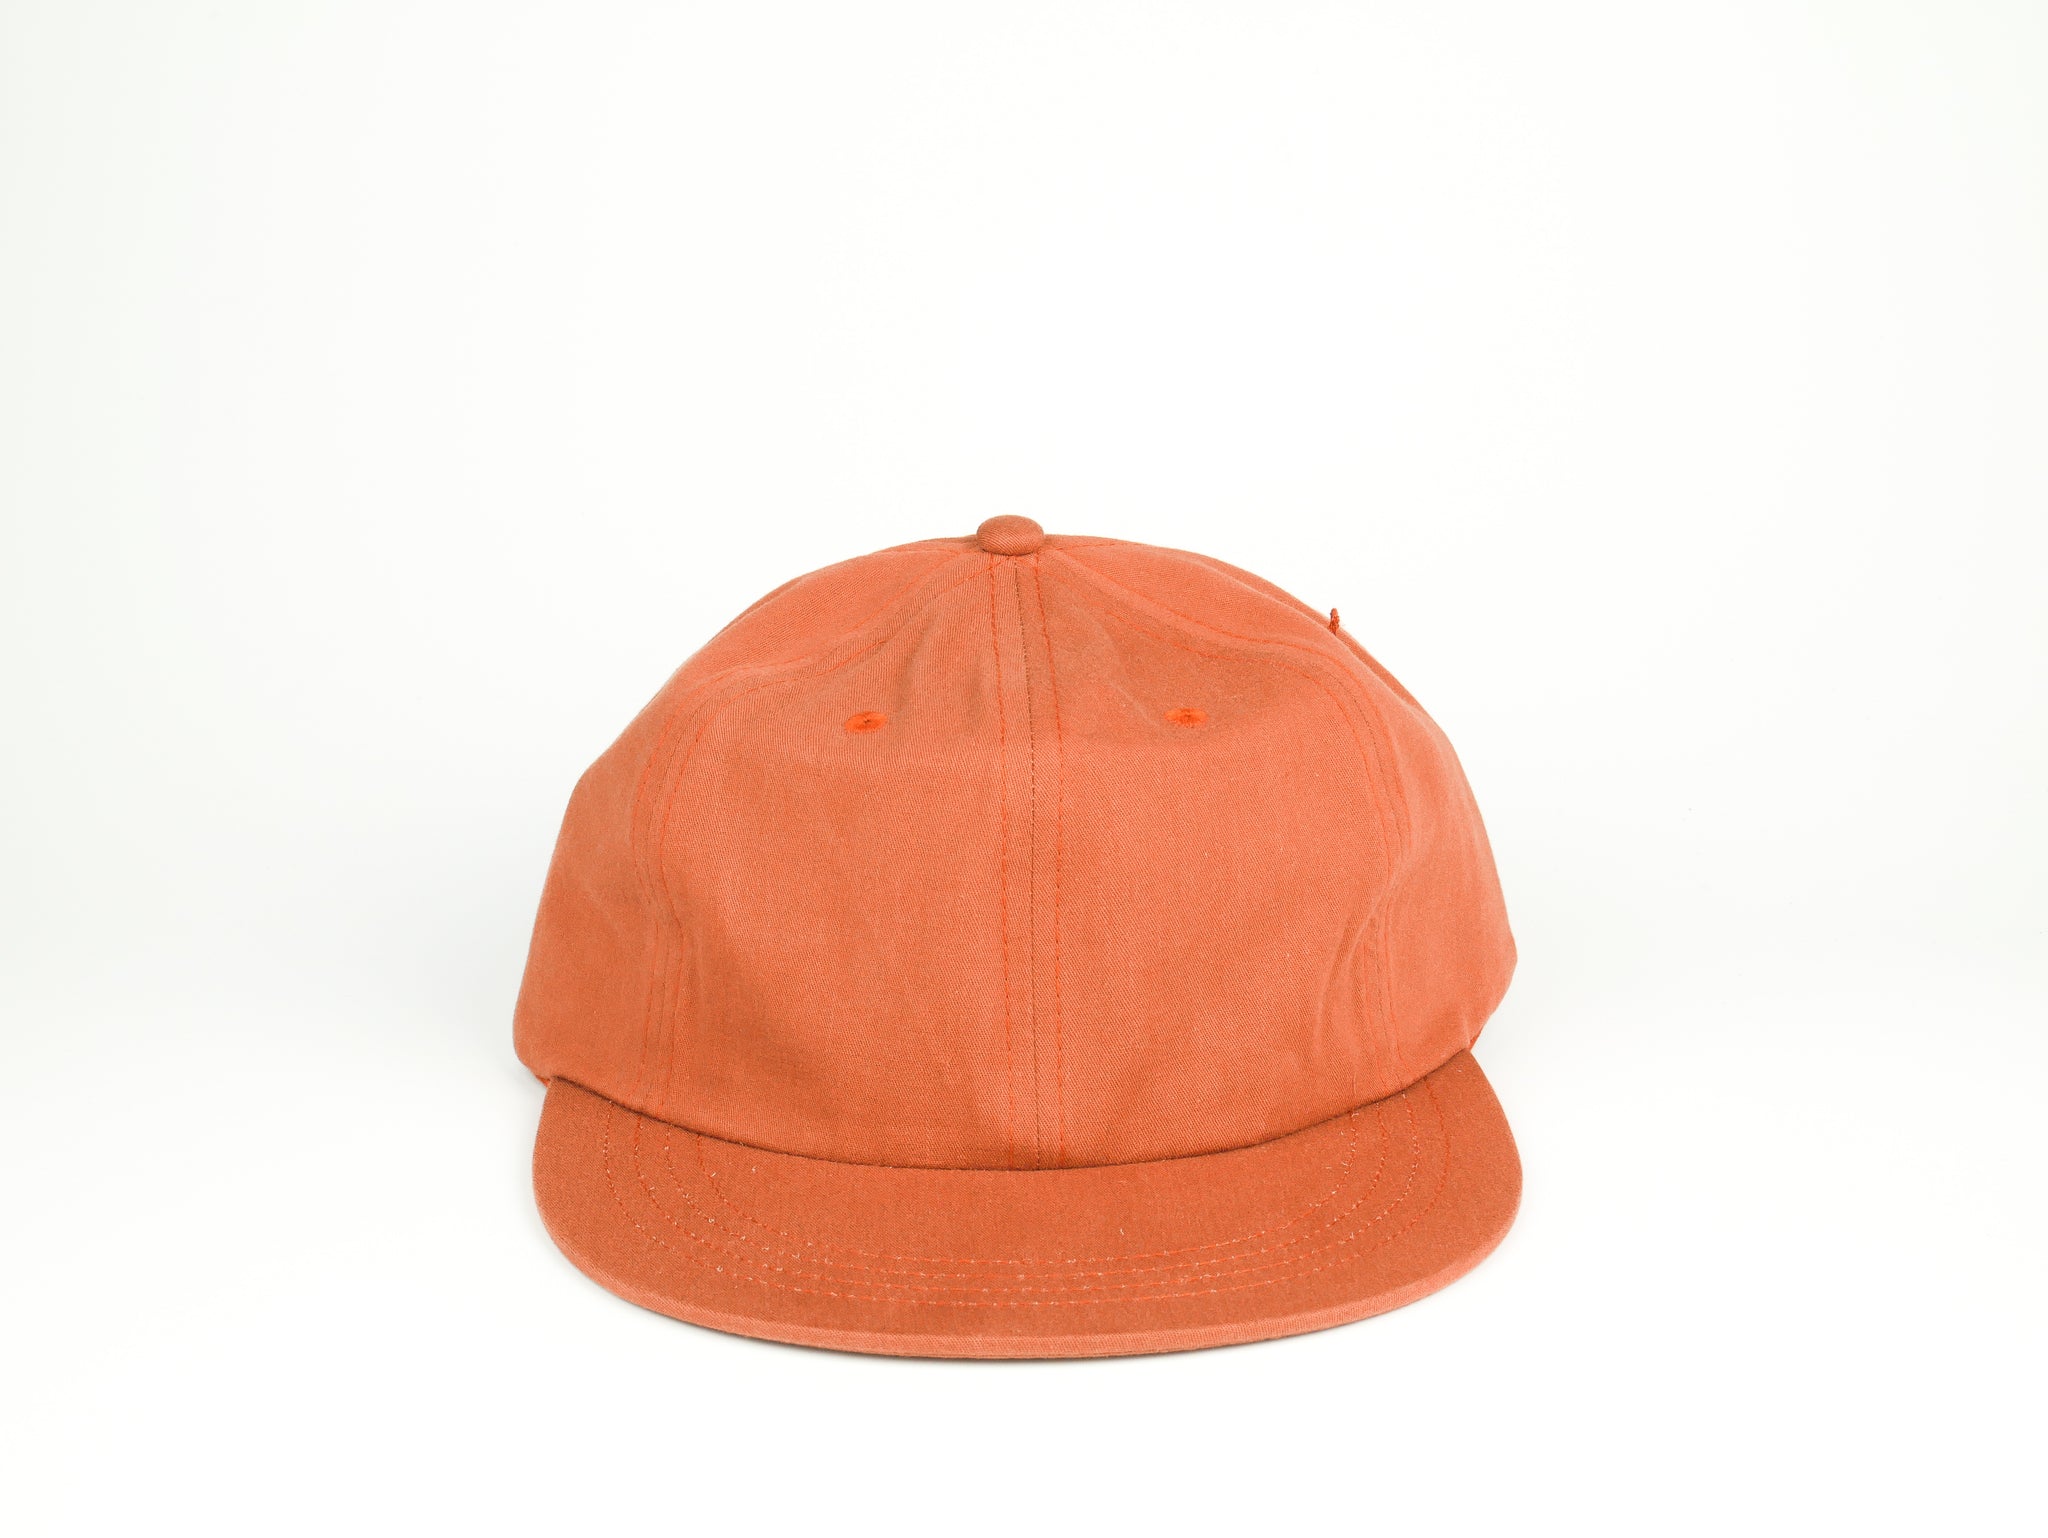 The Easy - 100% Cotton - Apricot